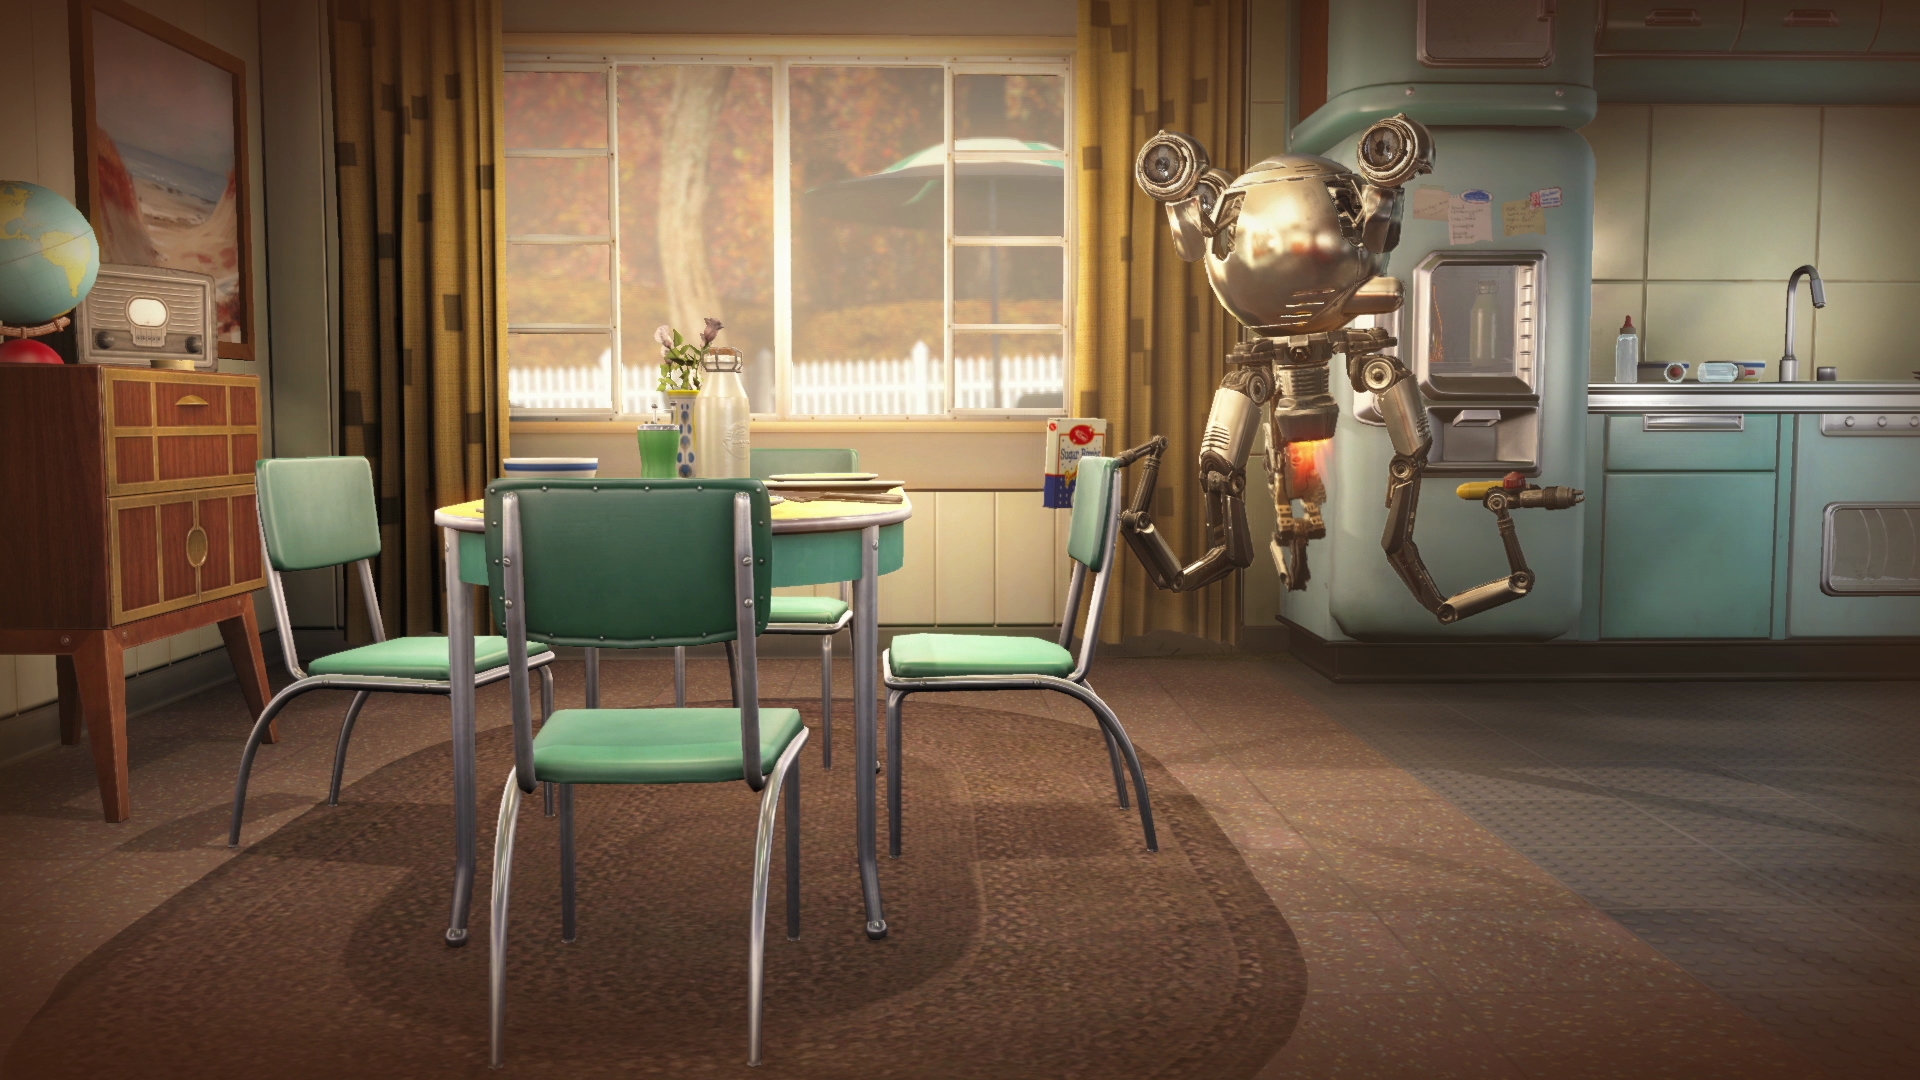 Fallout 4 Has No Level Cap, Game Doesn’t End After Main Story